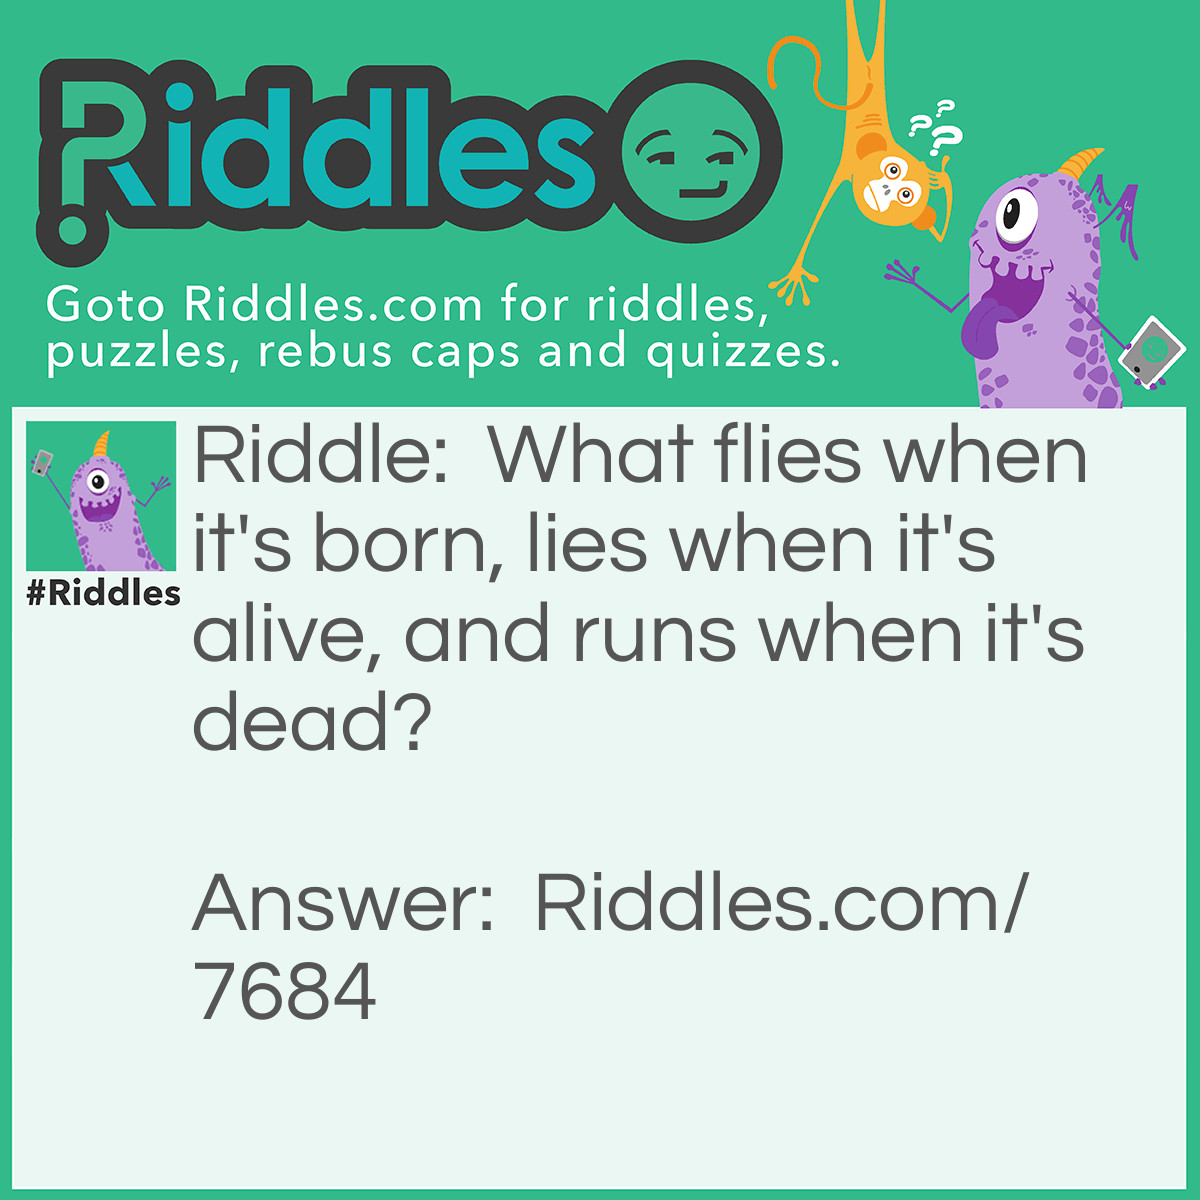 Riddle: What flies when it's born, lies when it's alive, and runs when it's dead? Answer: A snowflake.